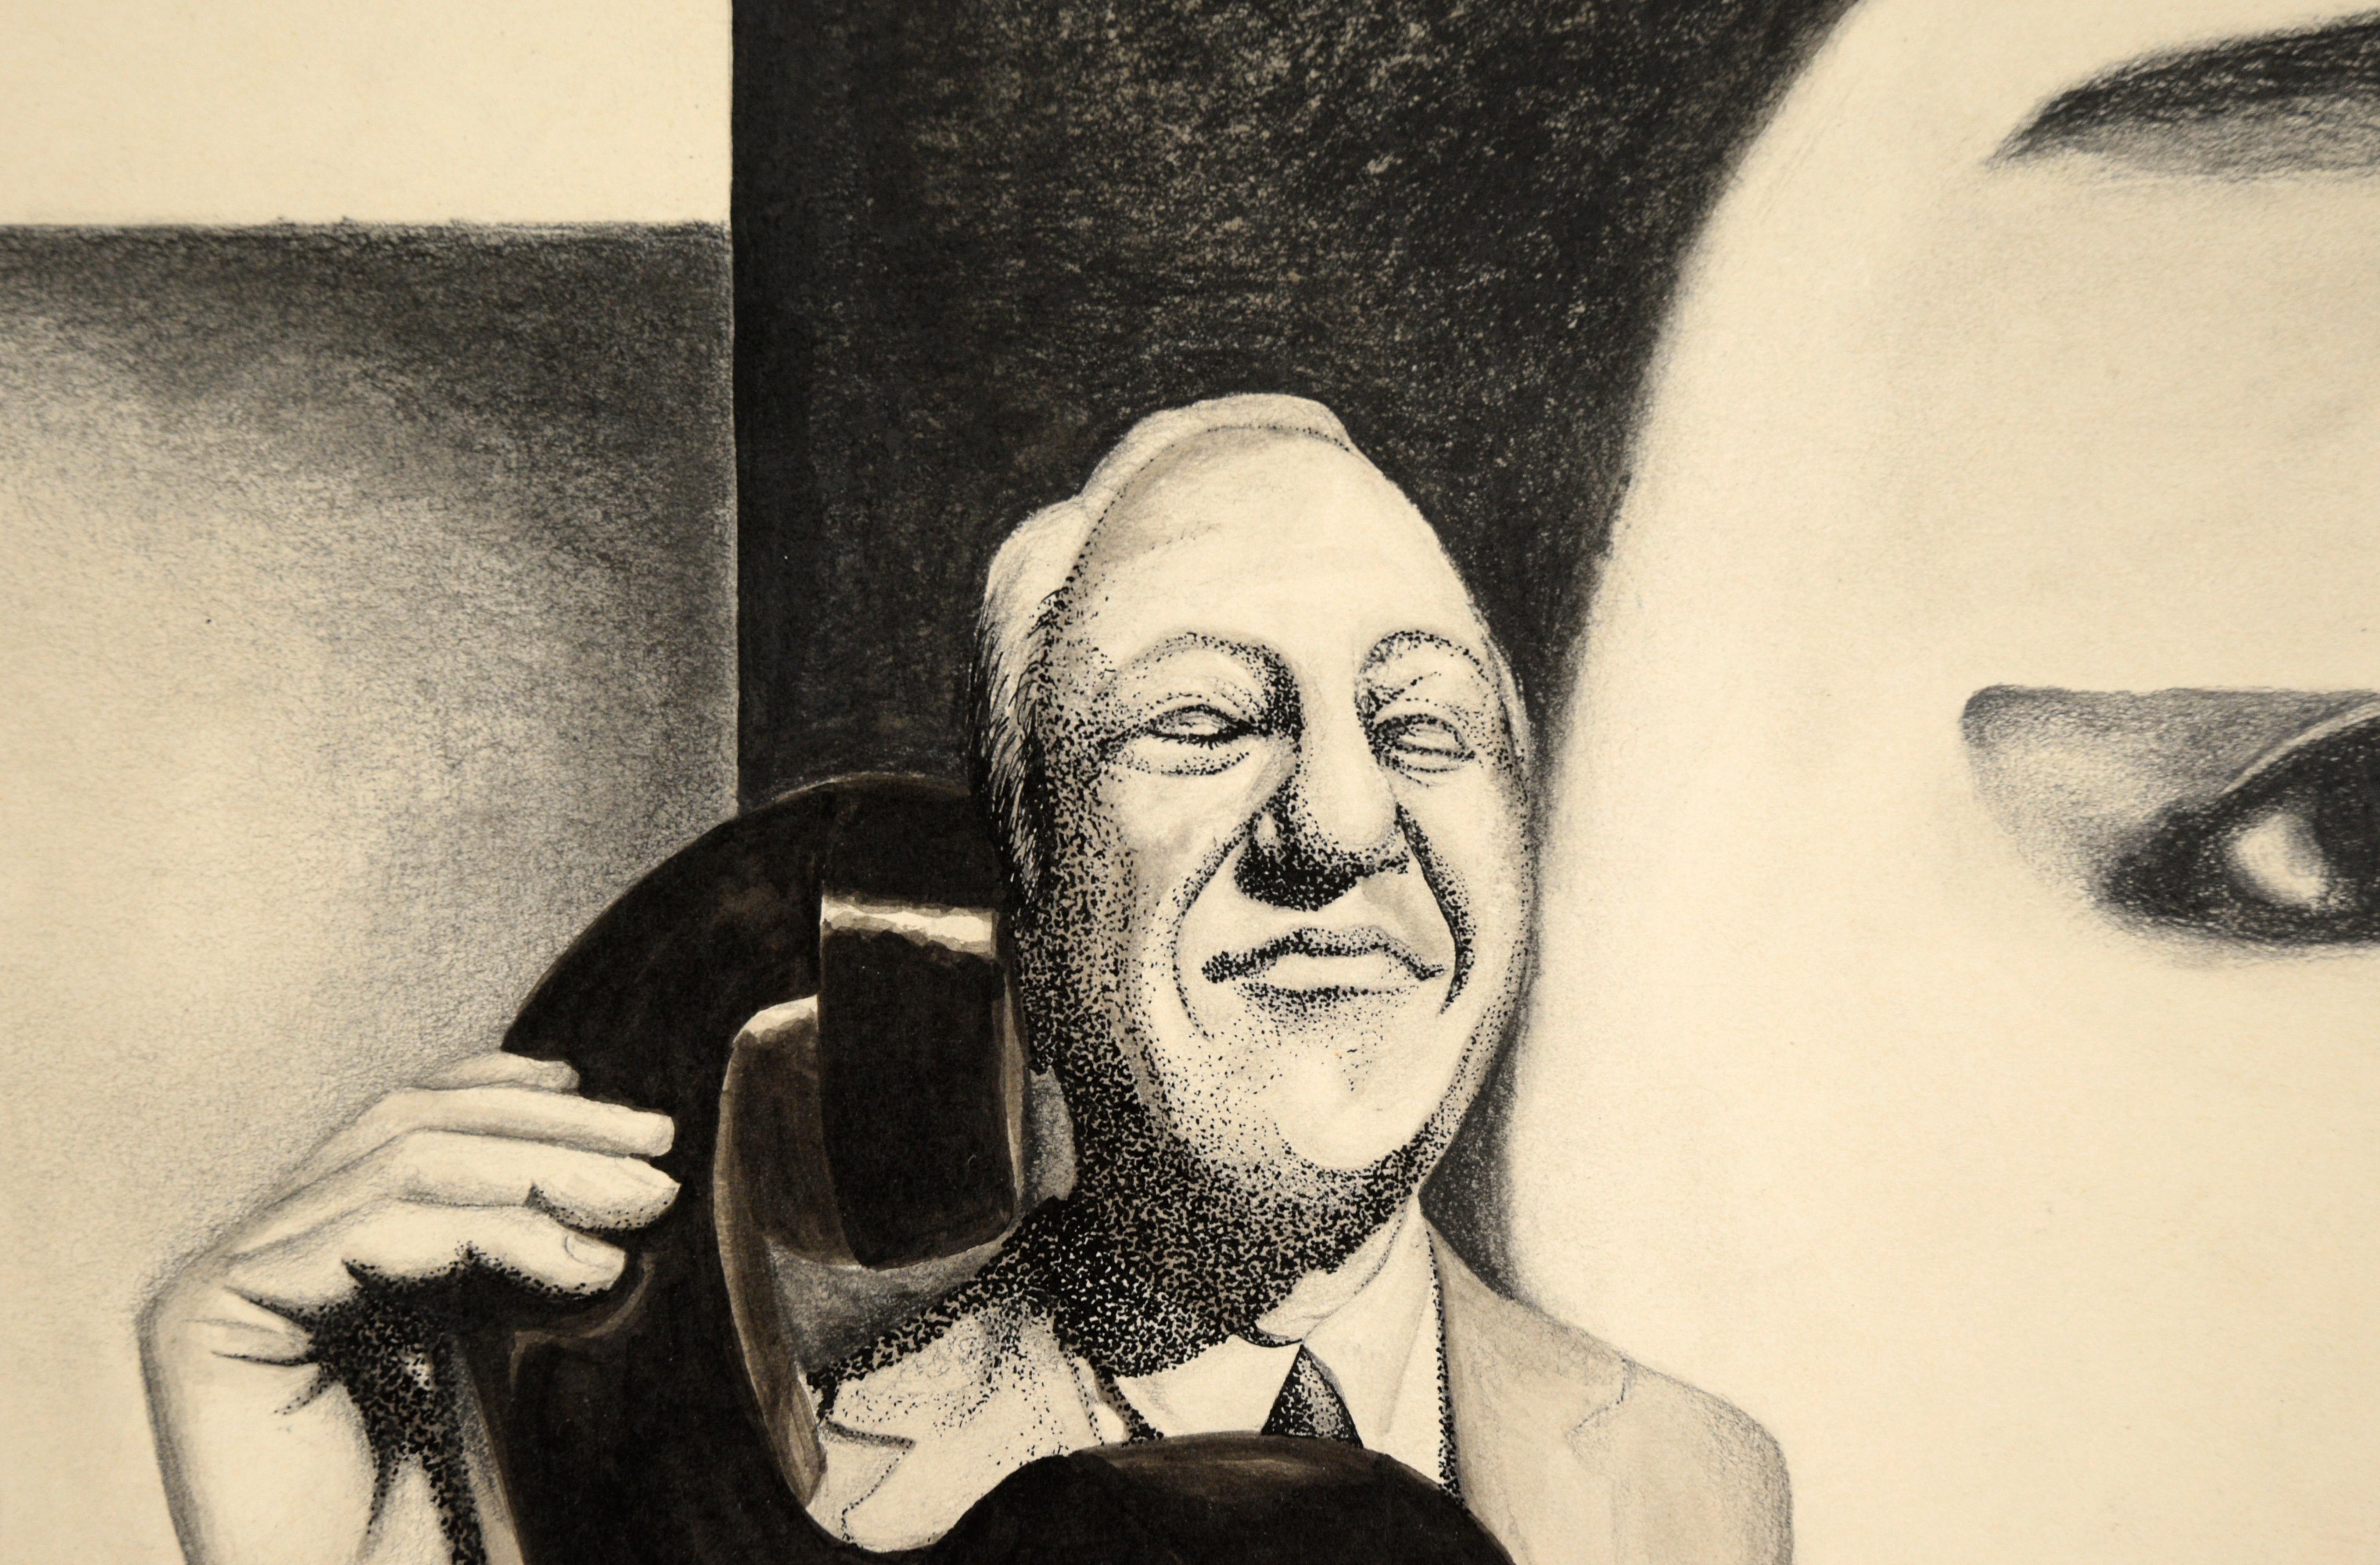 Man with Telephone - Surrealist Black and White Portrait in Ink on Paper

Surrealist composition by an unknown artist (20th Century). A man dressed in a suit holds an oversized telephone. He is reminiscent of a statue, as his eyes are notably devoid